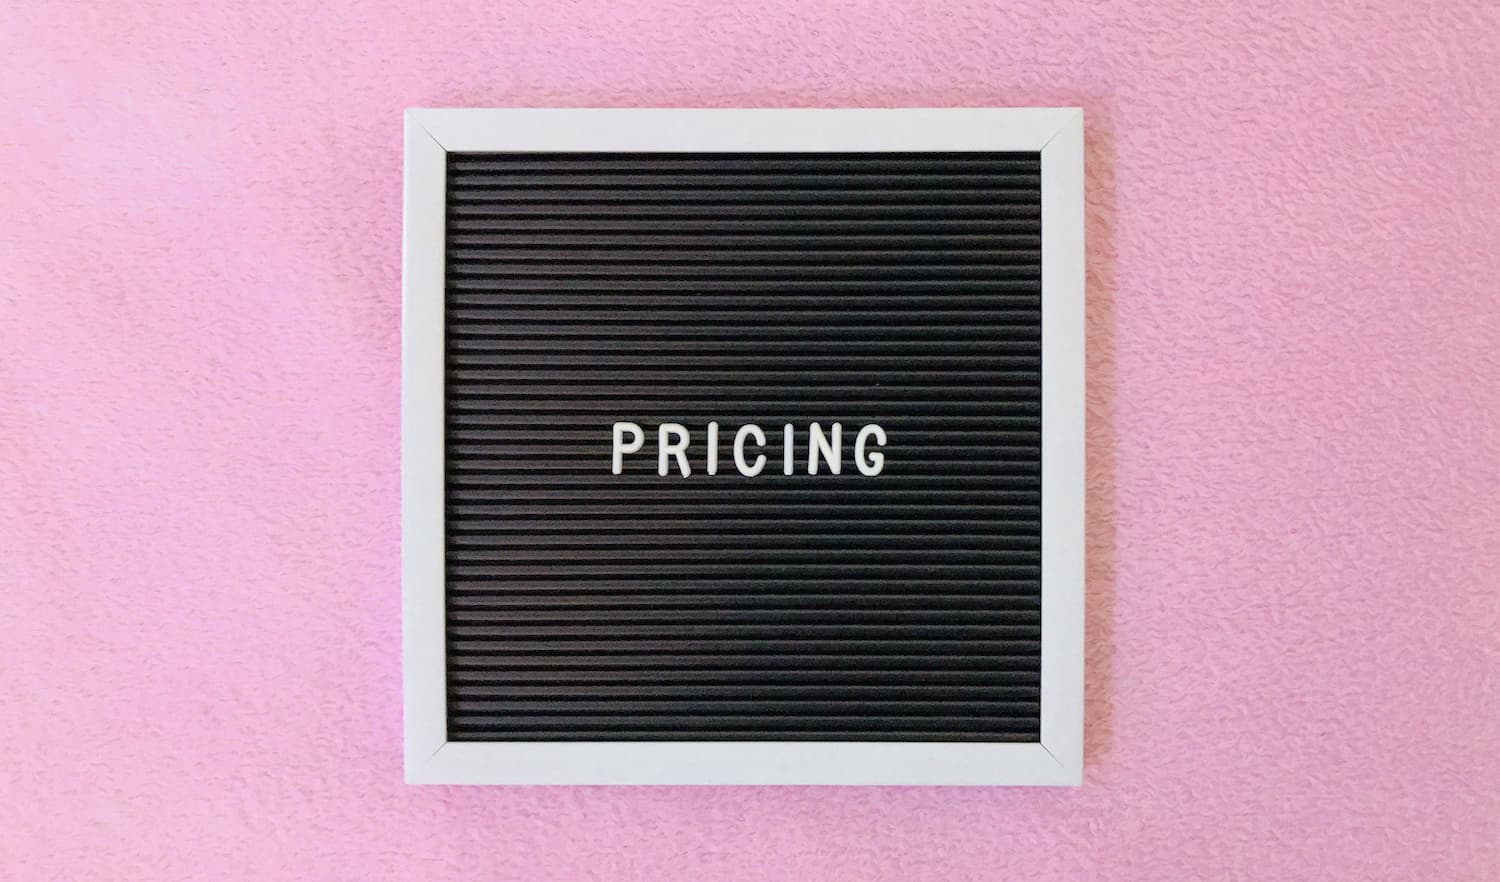  How to Determine Your Pricing and What You Are Worth